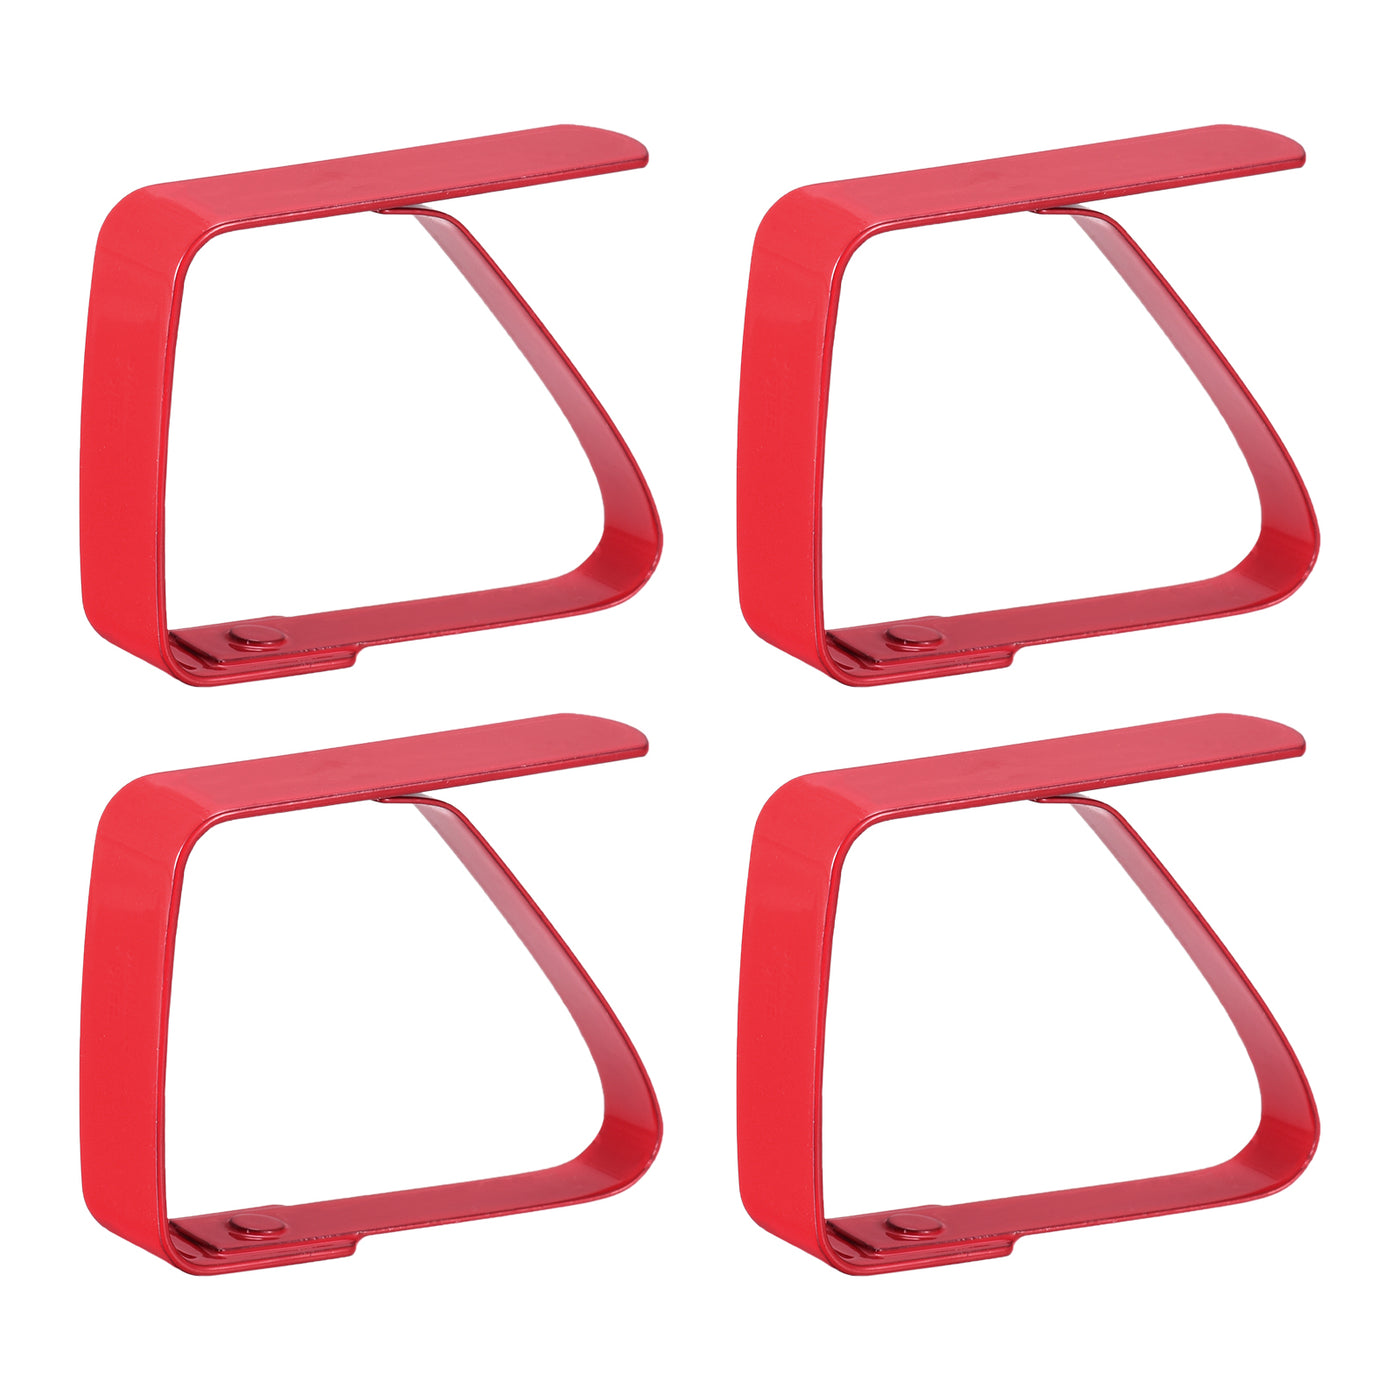 uxcell Uxcell Tablecloth Clips 50mm x 40mm 420 Stainless Steel Table Cloth Holder Red 12 Pcs